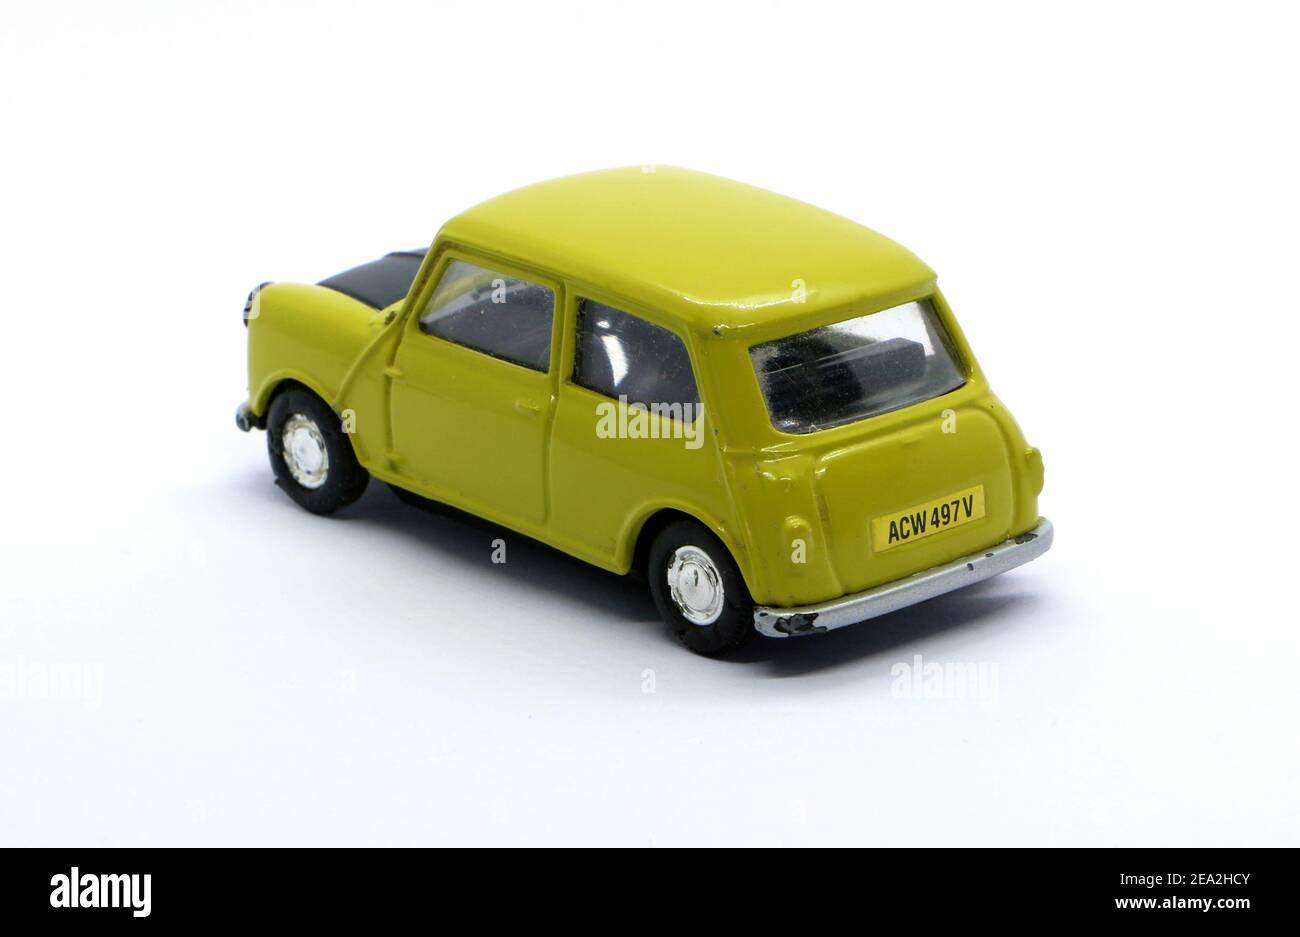 Photo of a Corgi die cast model of the green and black Mini car used in the Mr Bean tv series and films Stock Photo